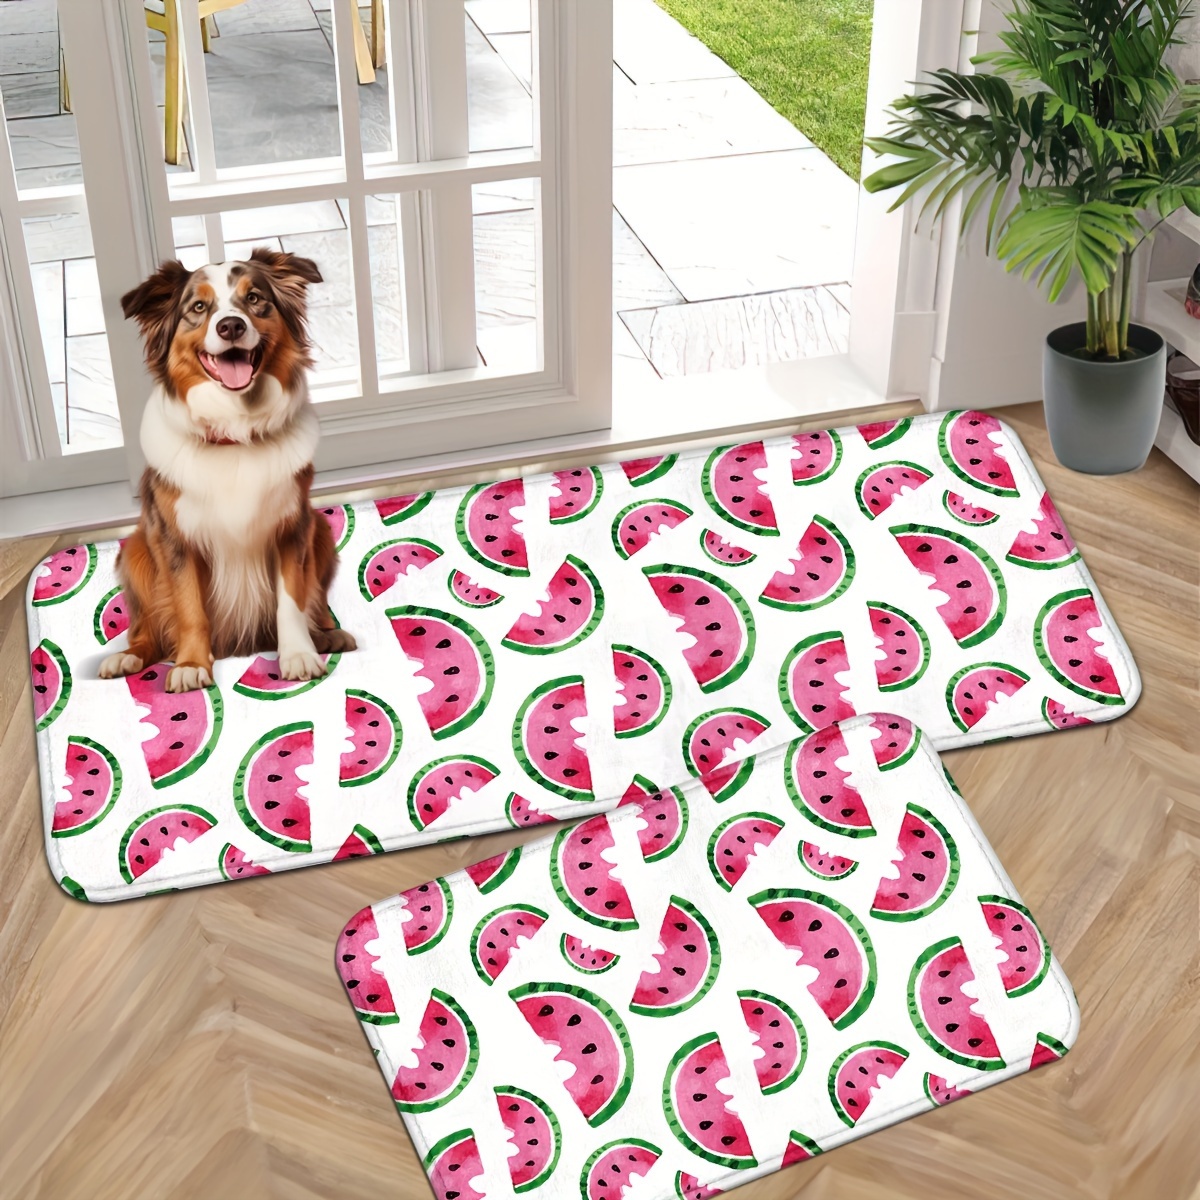 

Festive Watermelon Kitchen Mats - Non-slip, Durable, And Comfortable For Kitchen, Home, Office, And Bathroom - Available In Different Sizes